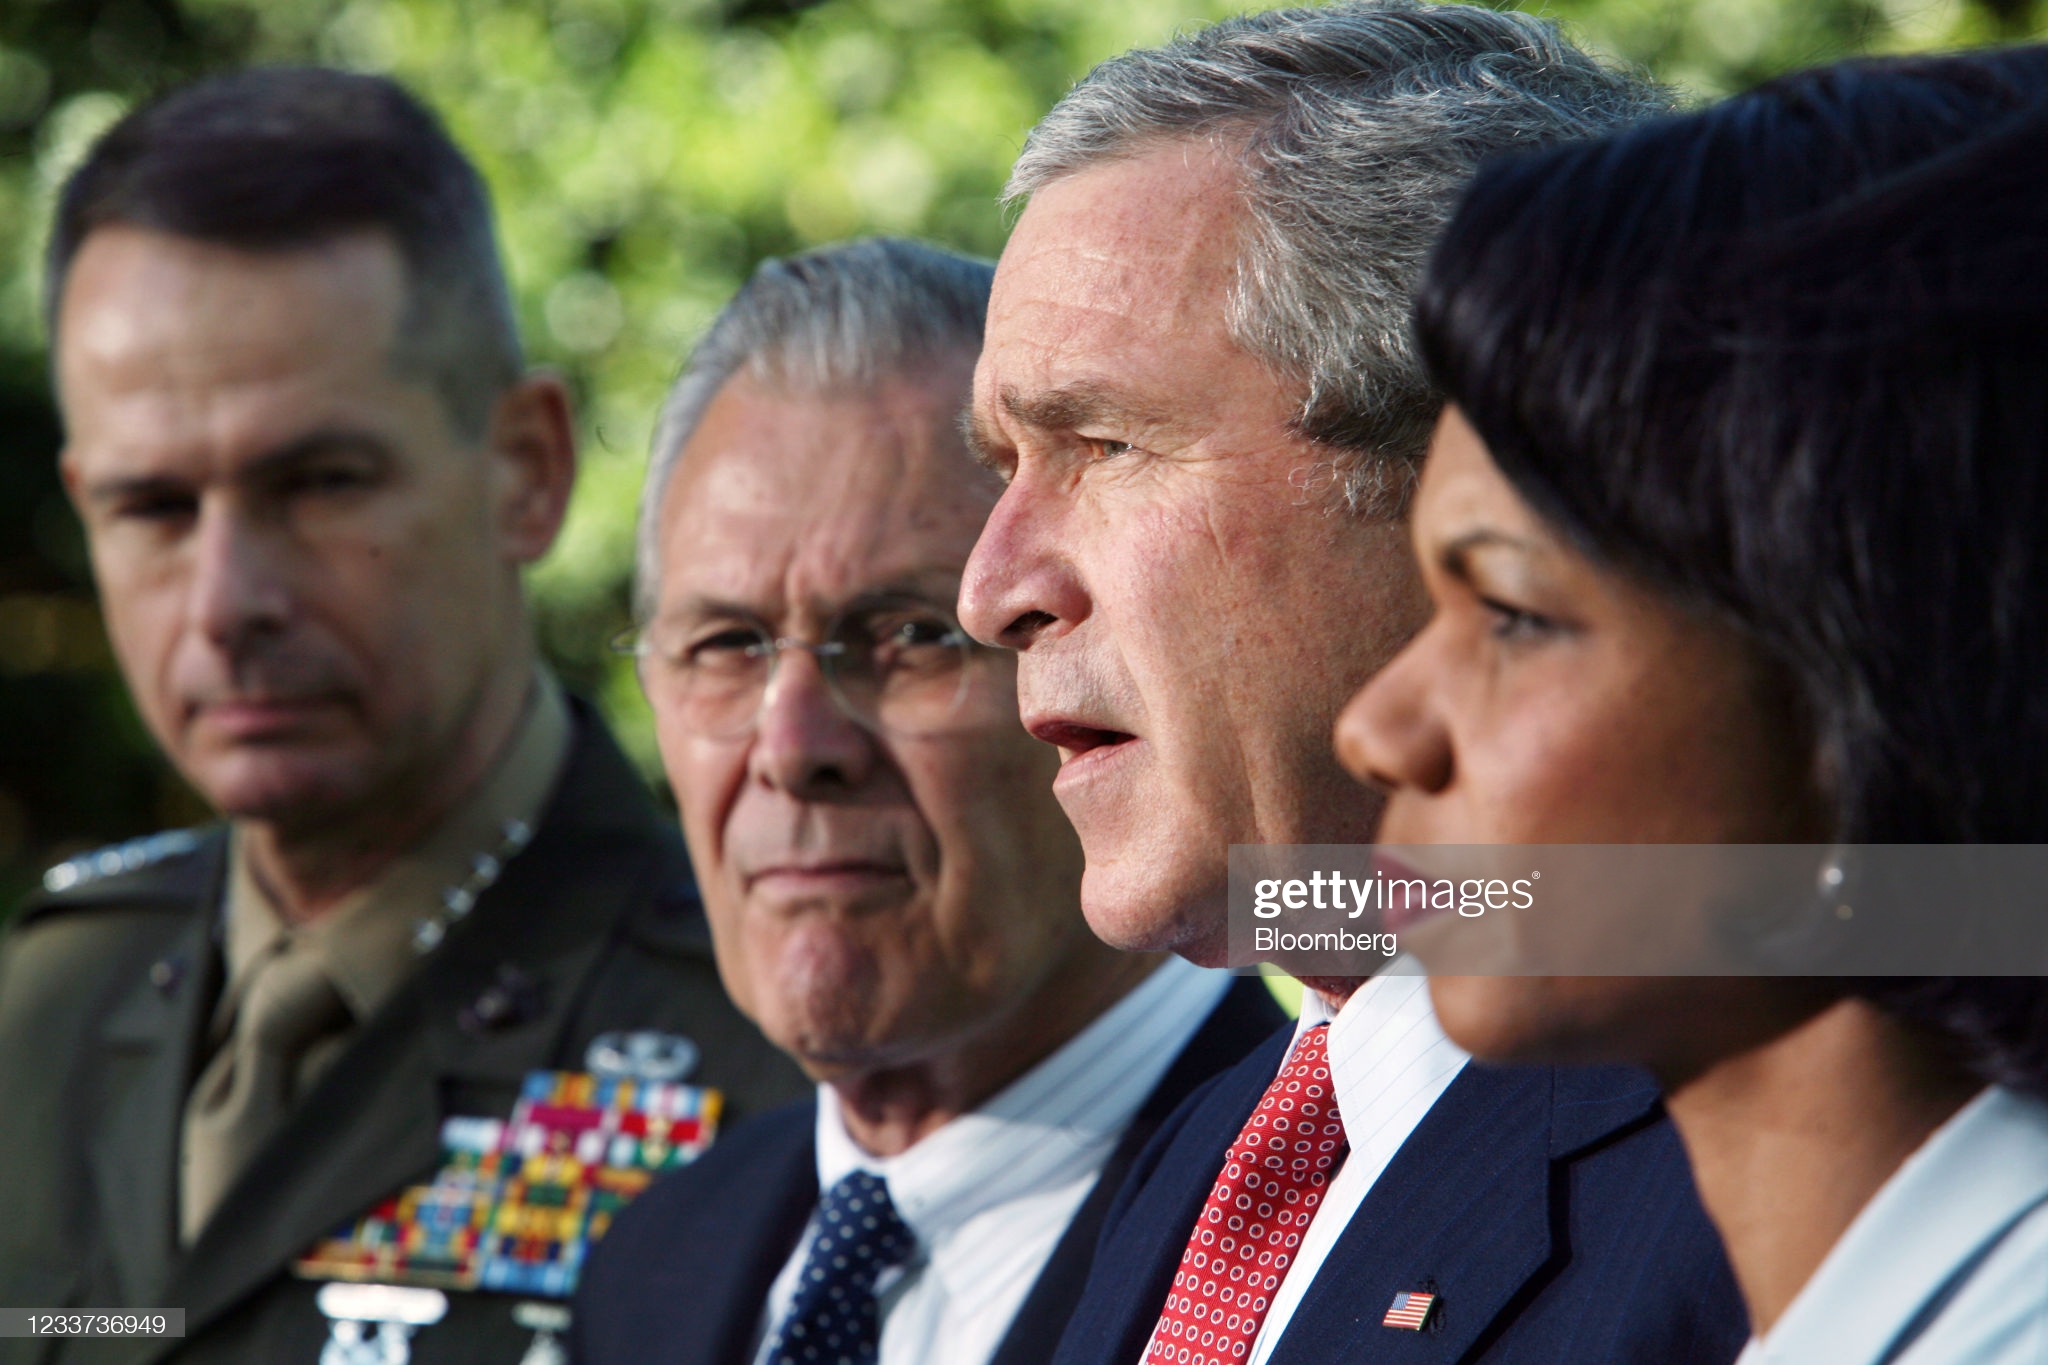 president-george-w-bush-third-from-left-makes-a-statement-in-the-rose-picture-id1233736949